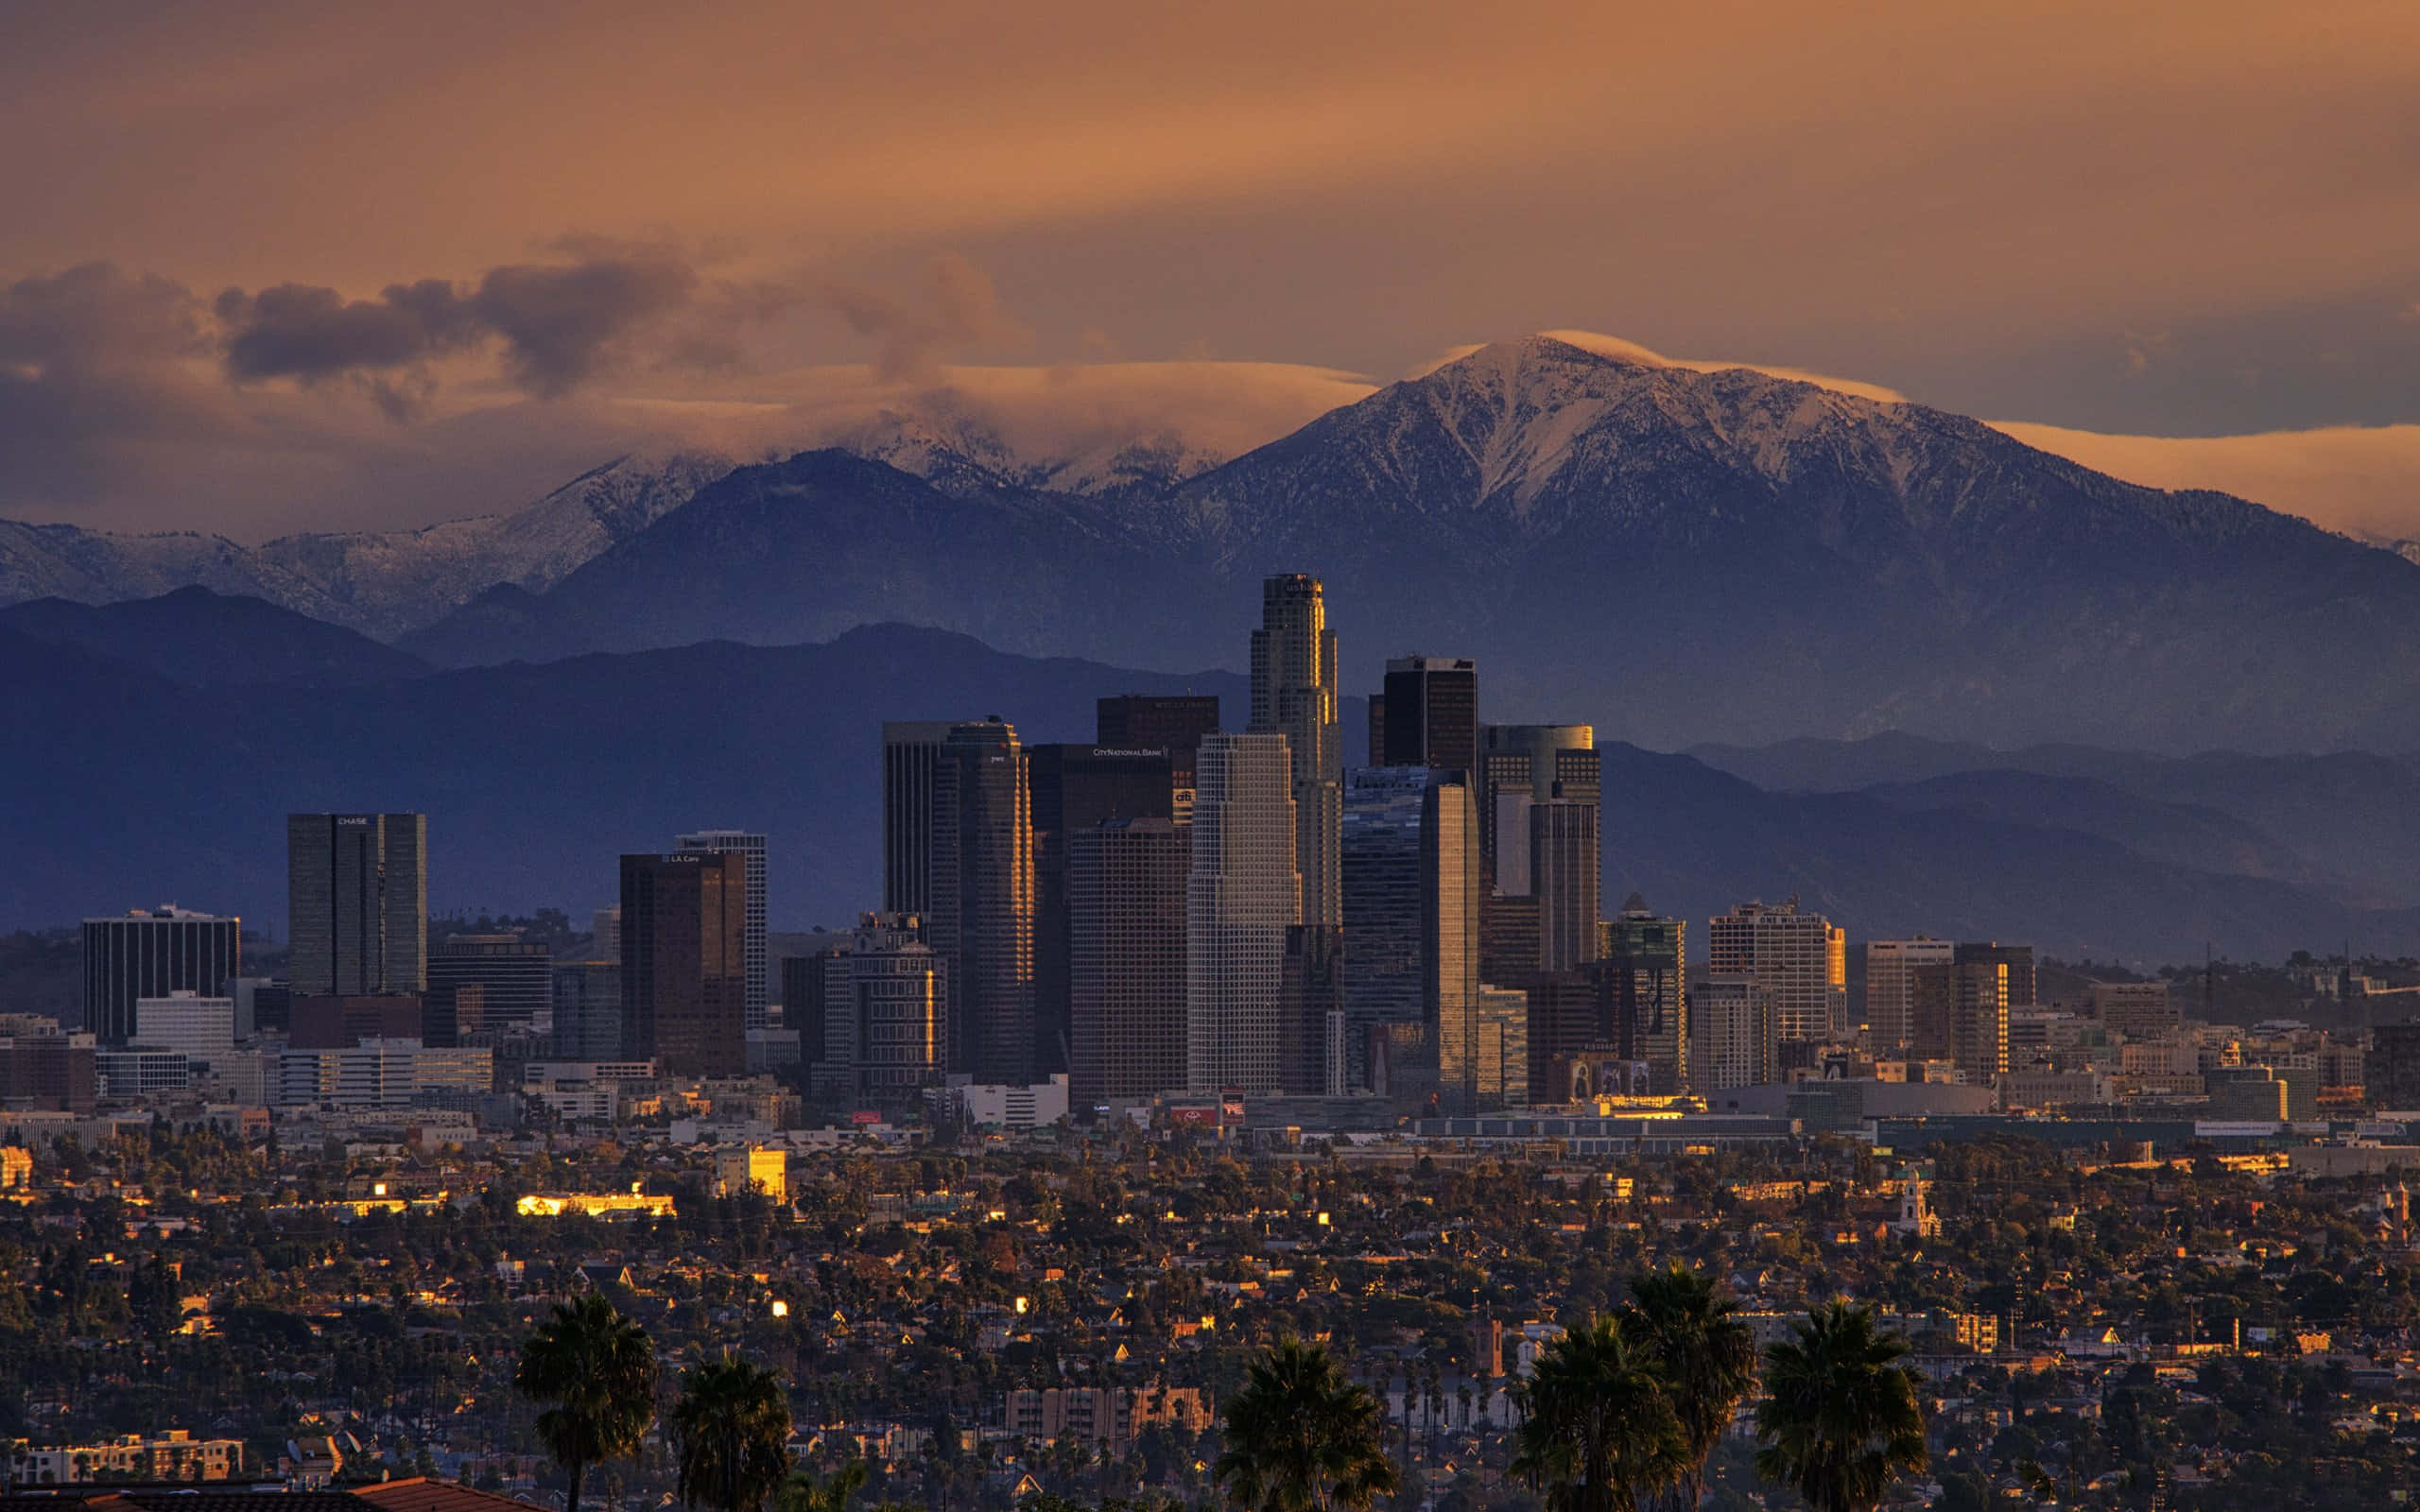 Stunning panoramic view of the Los Angeles skyline at dusk